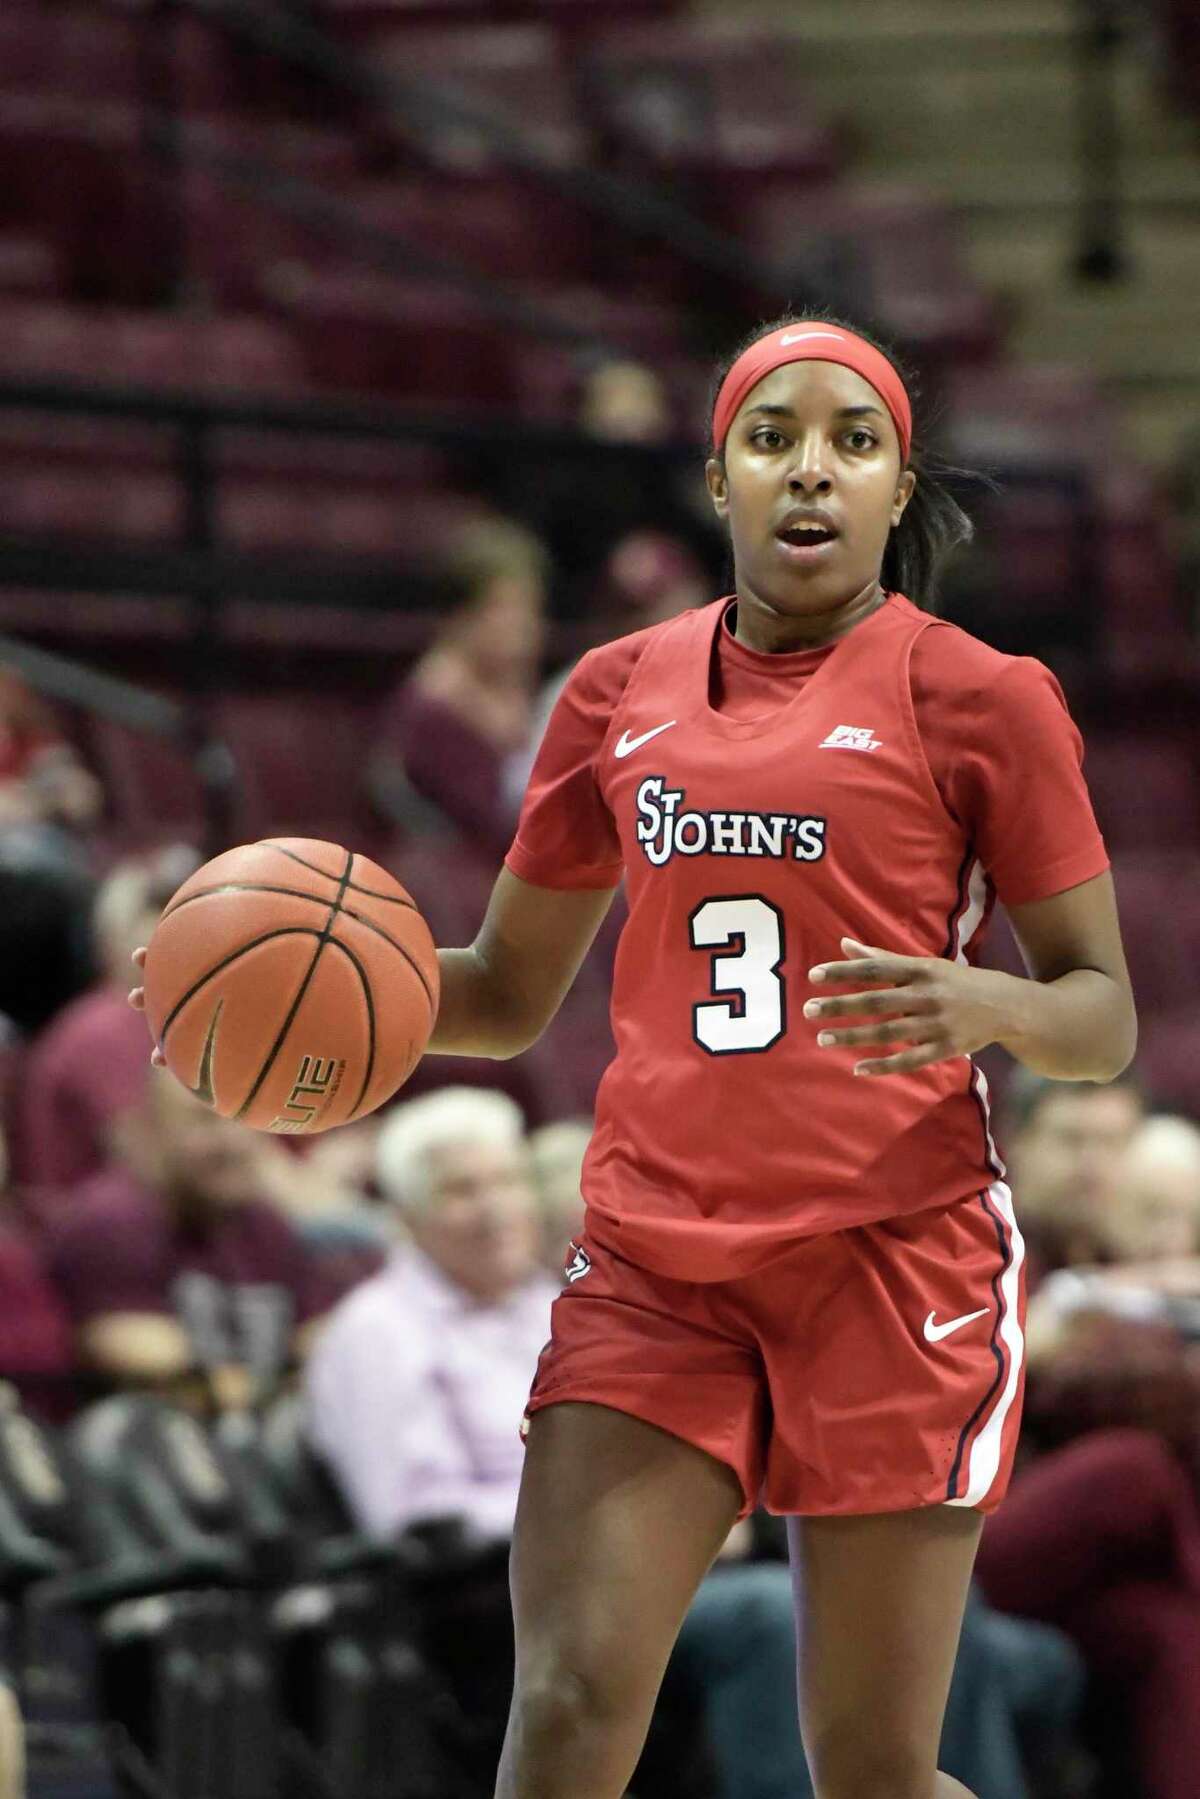 Stamford's Tiana England transferring from St. John's to Florida State